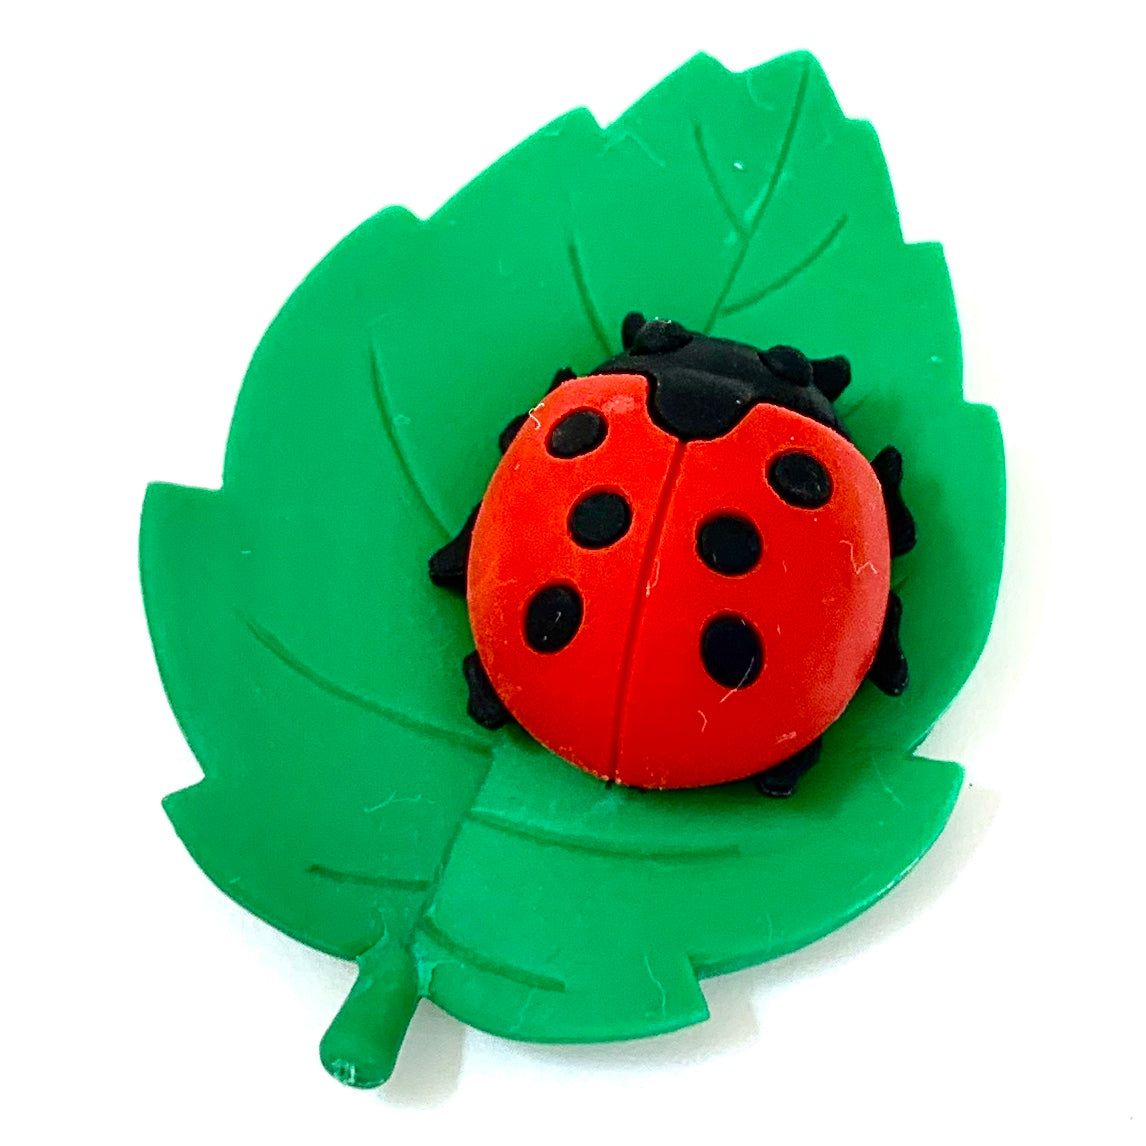 Insect World - Buy Eraser Clay, eraser clay insect toy, clay insect toy  Product on PAULINDA INDUSTRIES(1999) LTD.